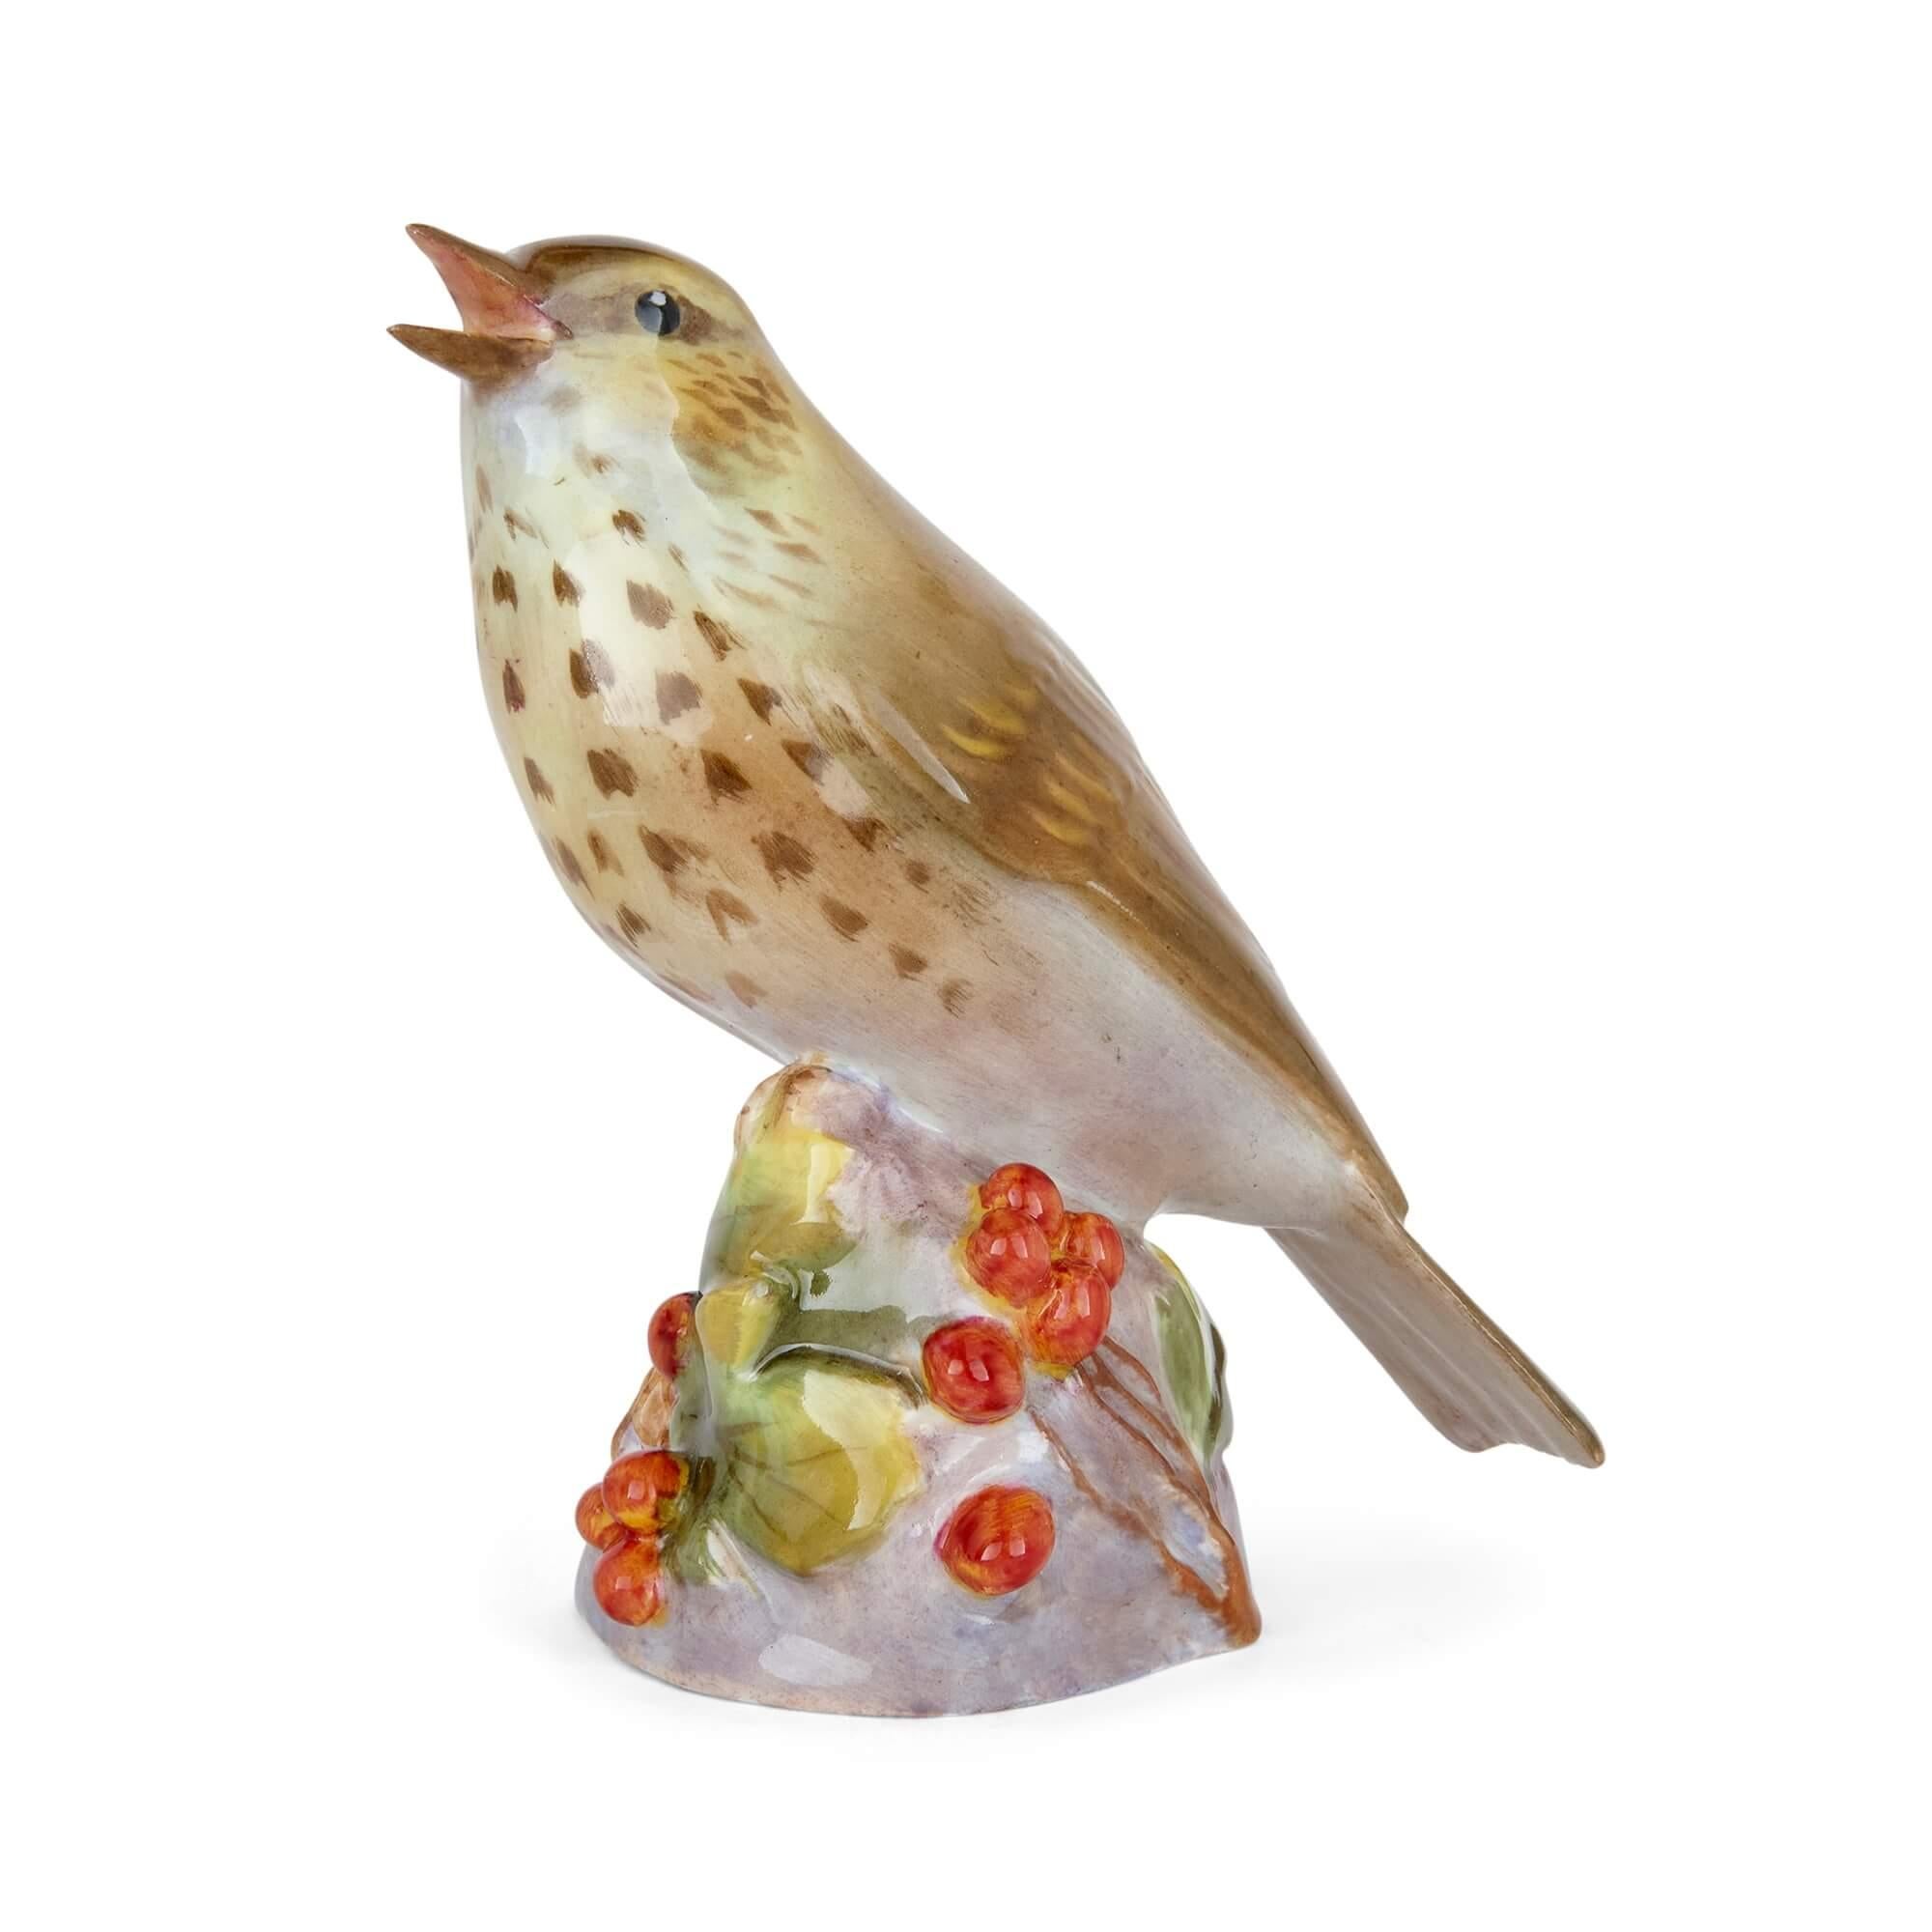 Two Royal Worcester porcelain bird models of a kingfisher and a thrush
English, c.1950
Thrush: Height 12cm, width 11cm, depth 6cm
Kingfisher: Height 8cm, width 11cm, depth 7.5cm

Made by the renowned Royal Worcester porcelain manufactory in around